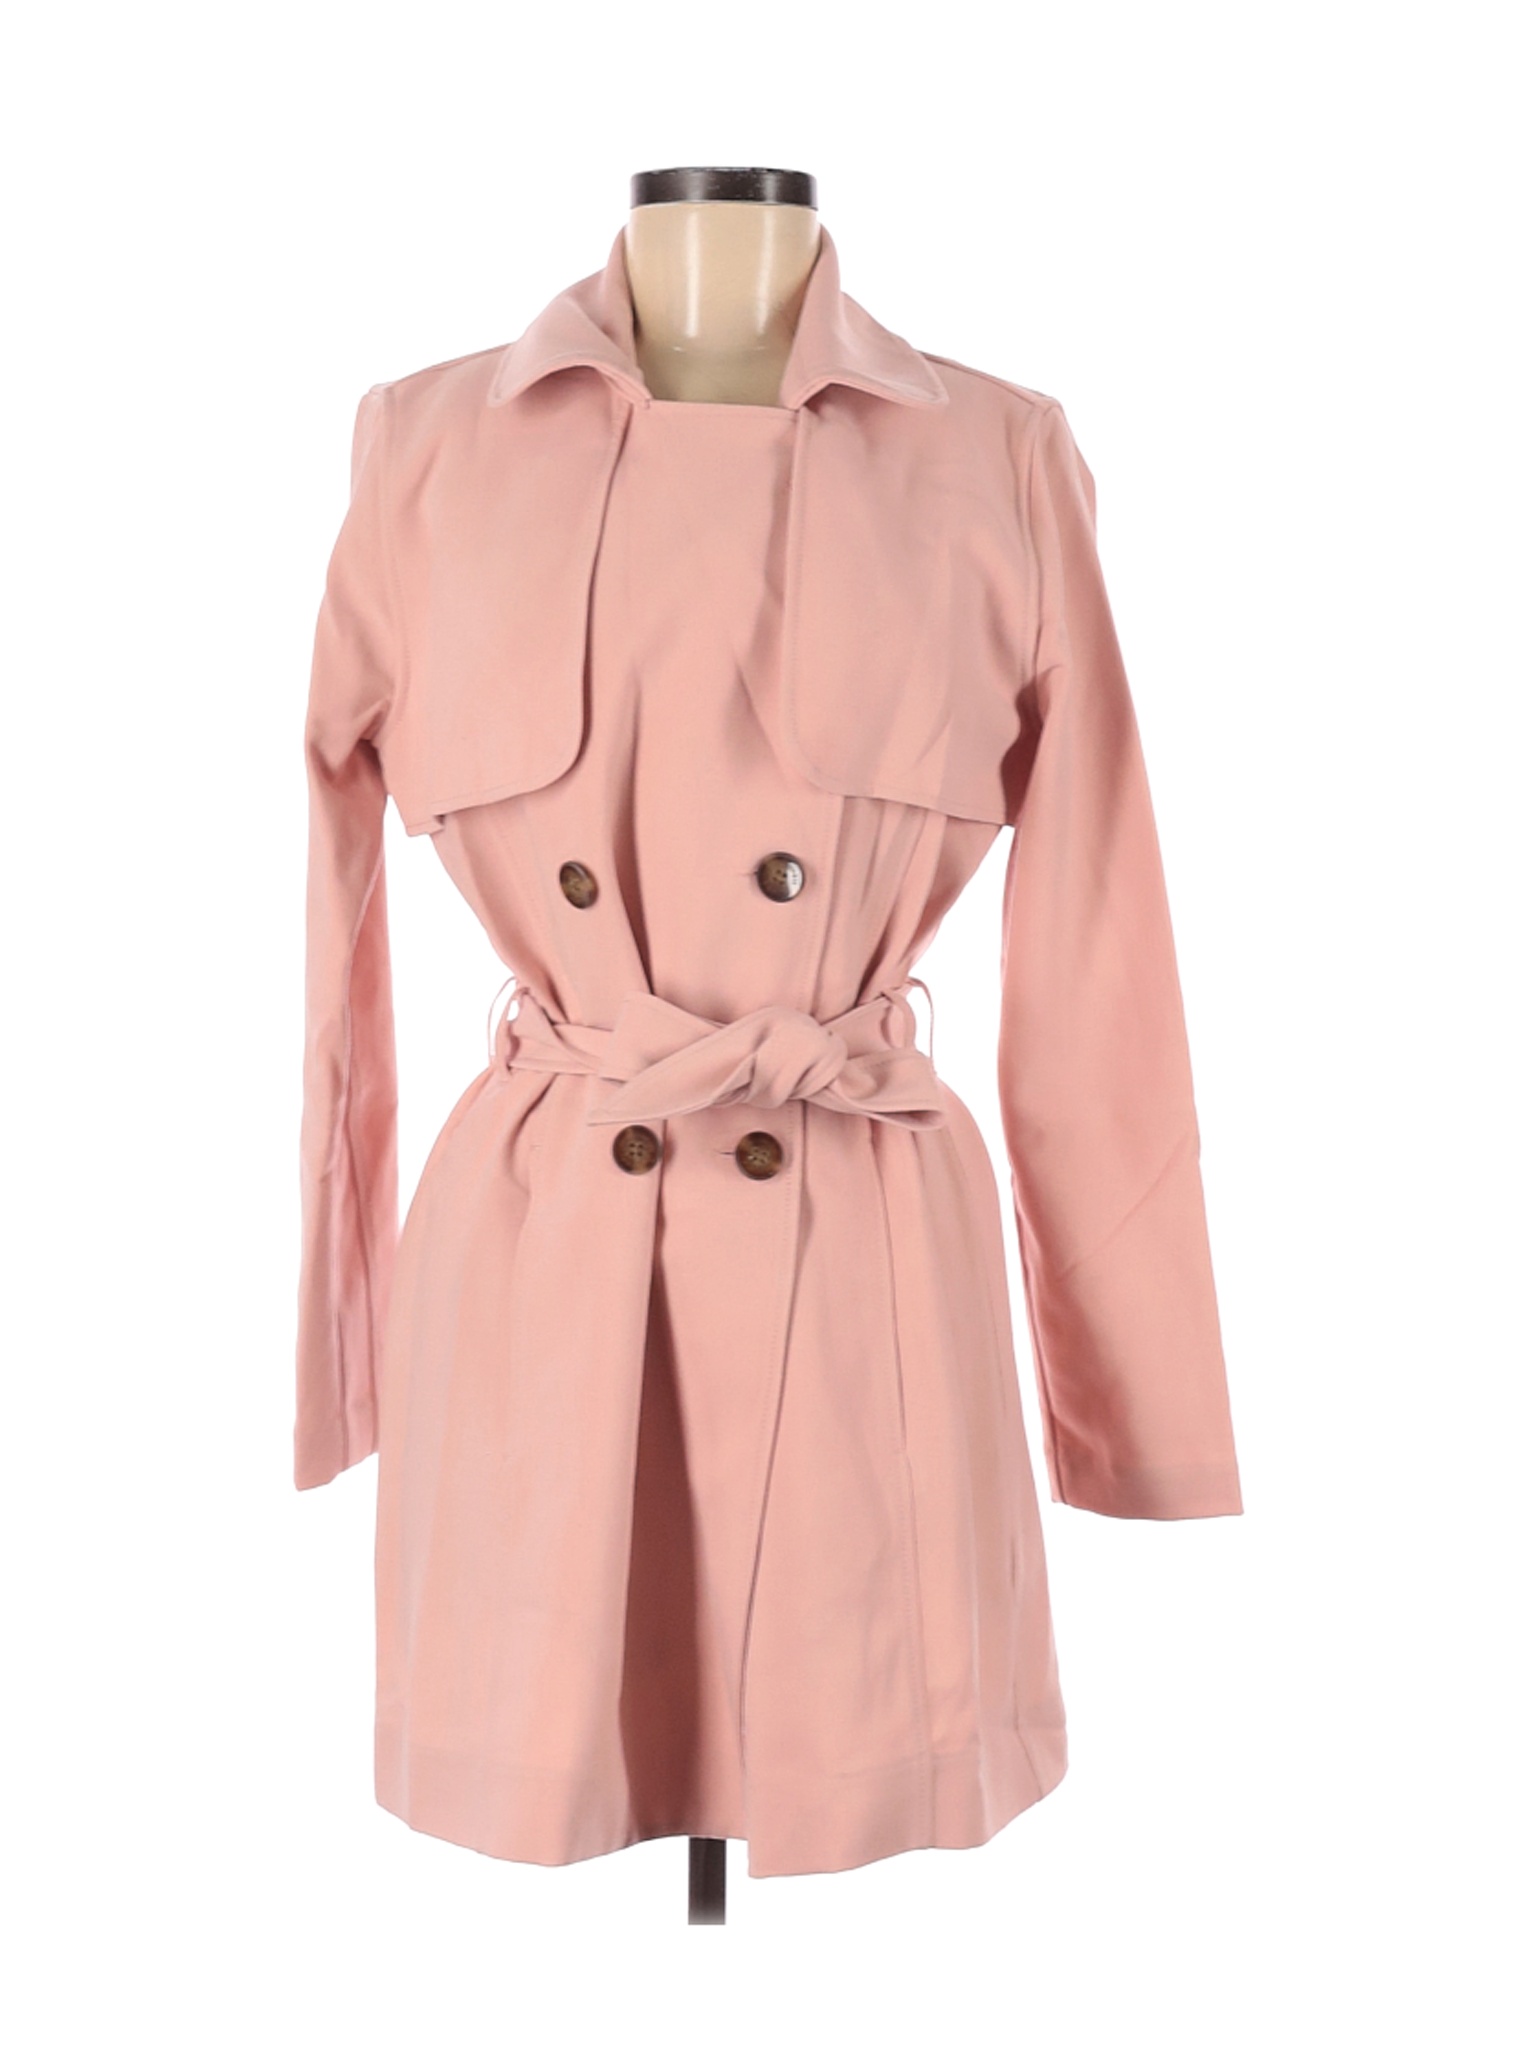 Abercrombie & Fitch Women Pink Trenchcoat M | eBay